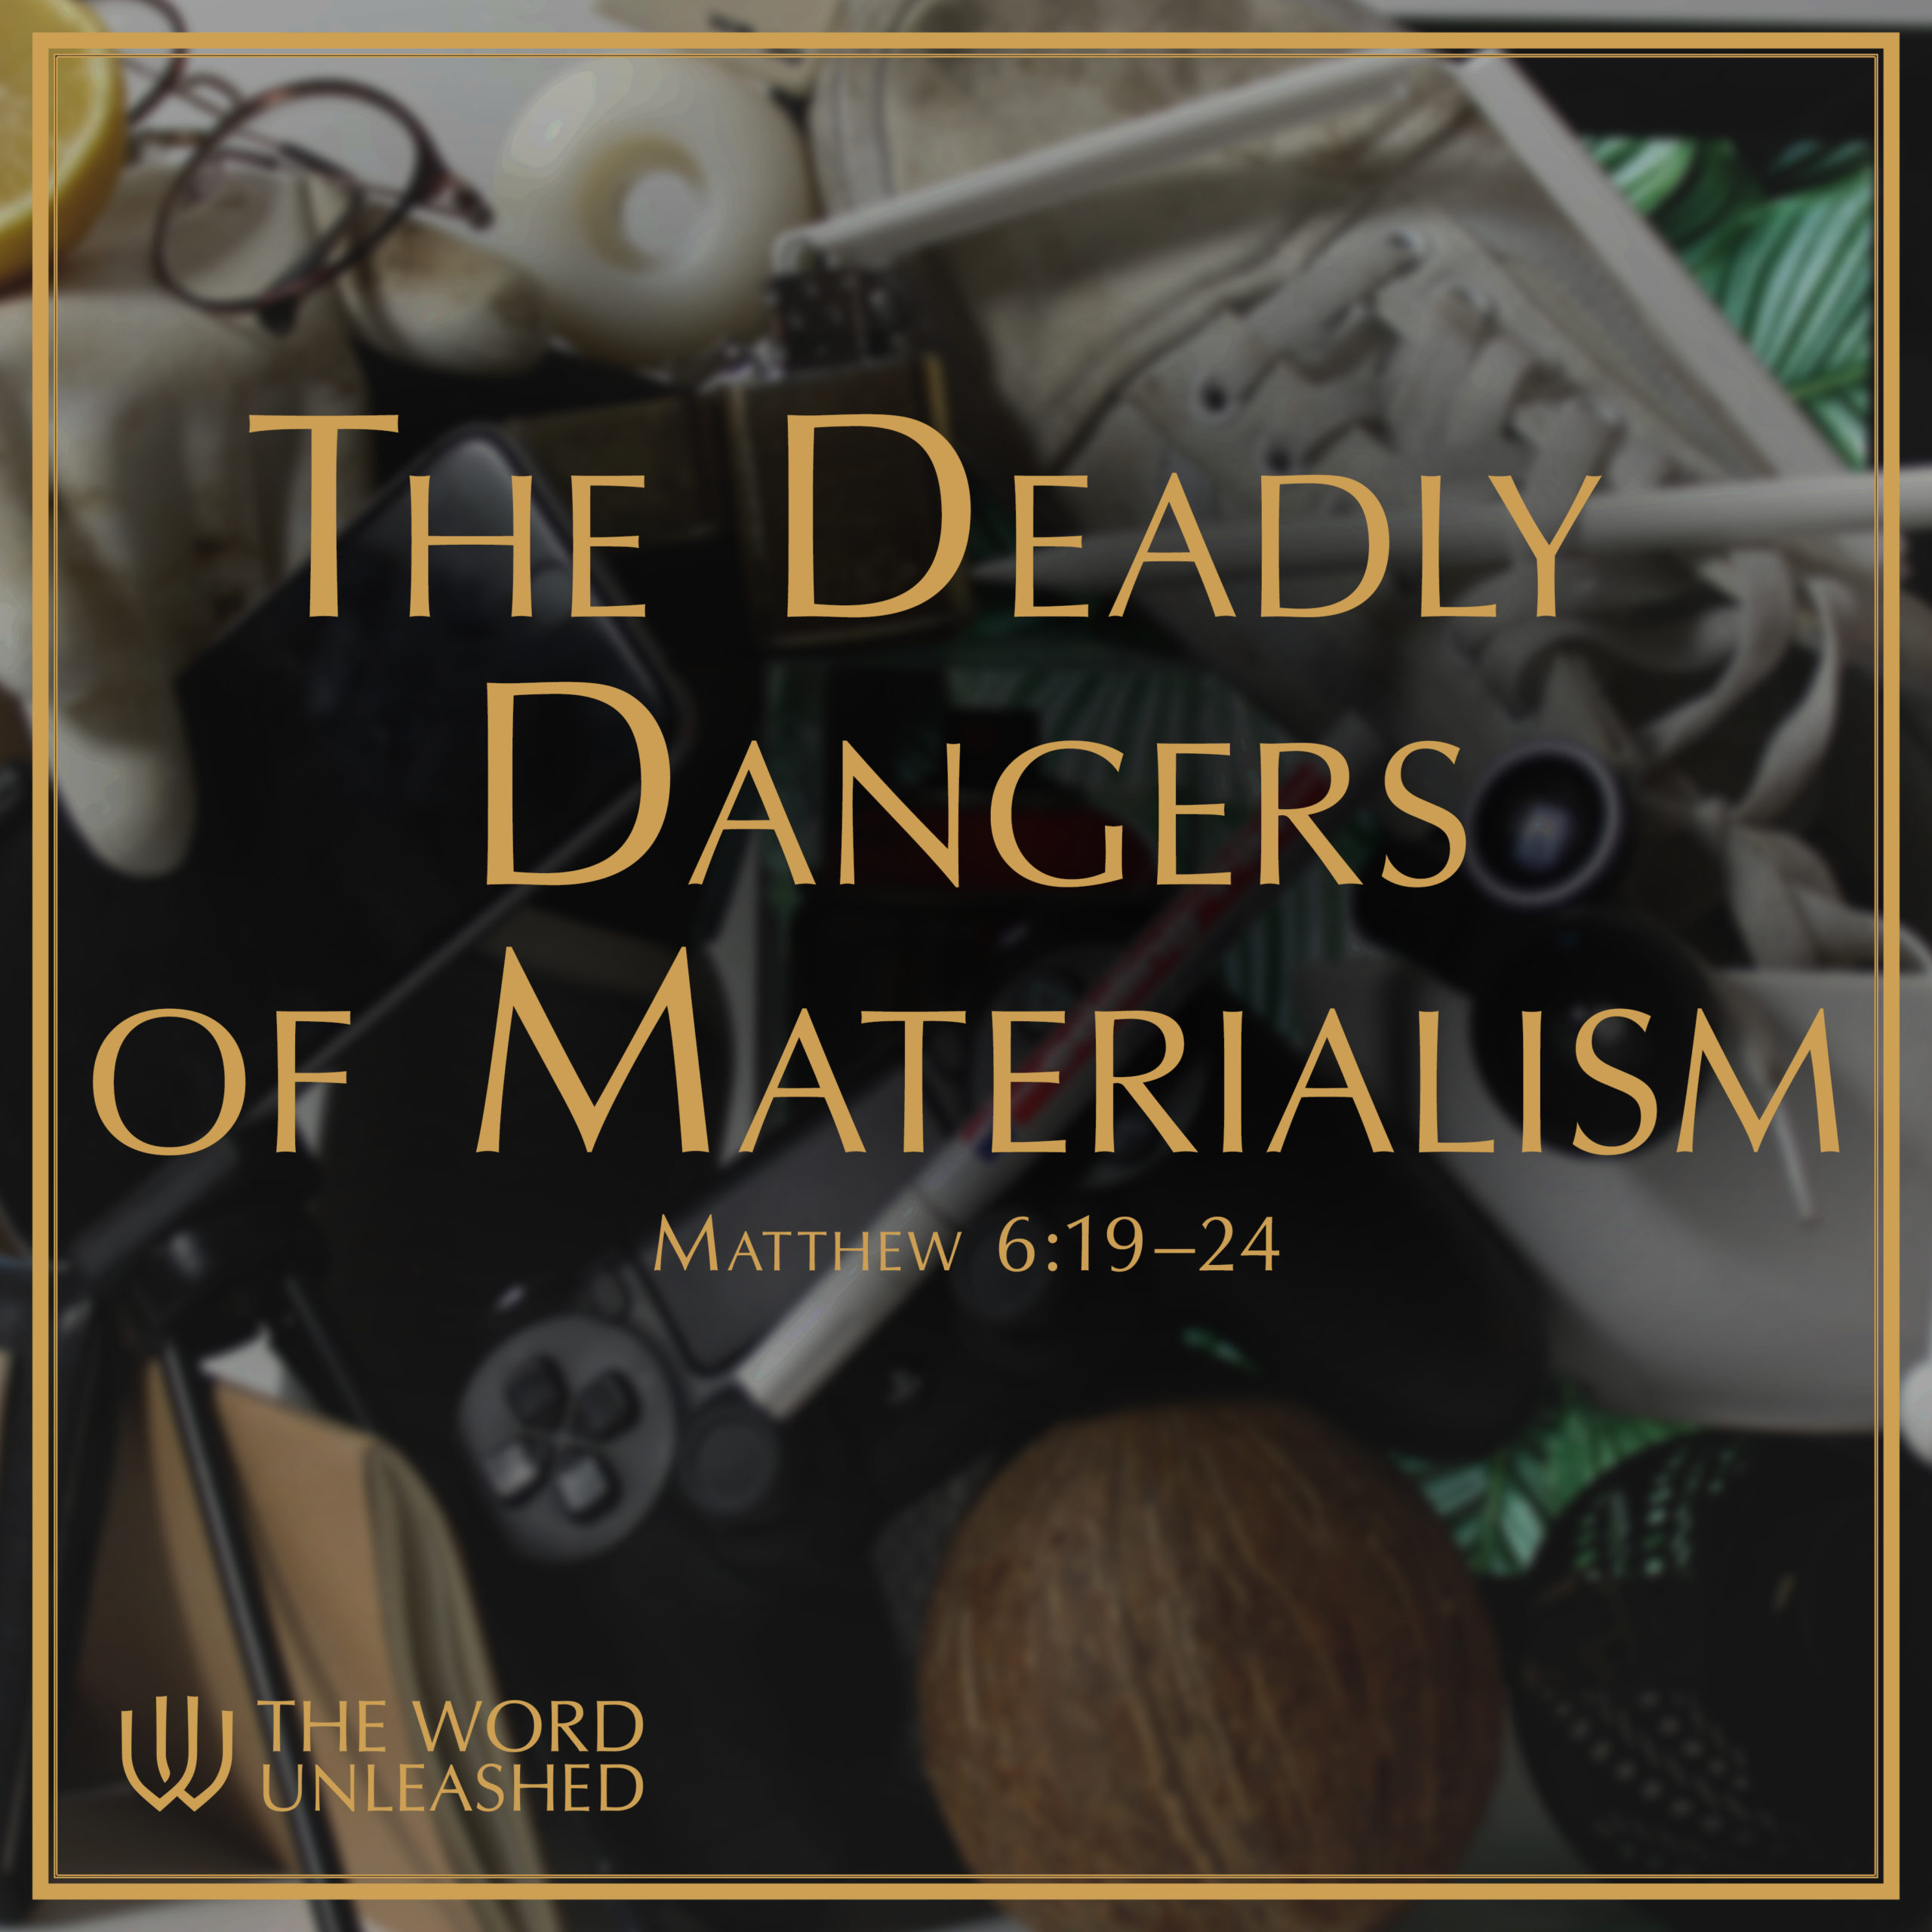 The Deadly Dangers of Materialism